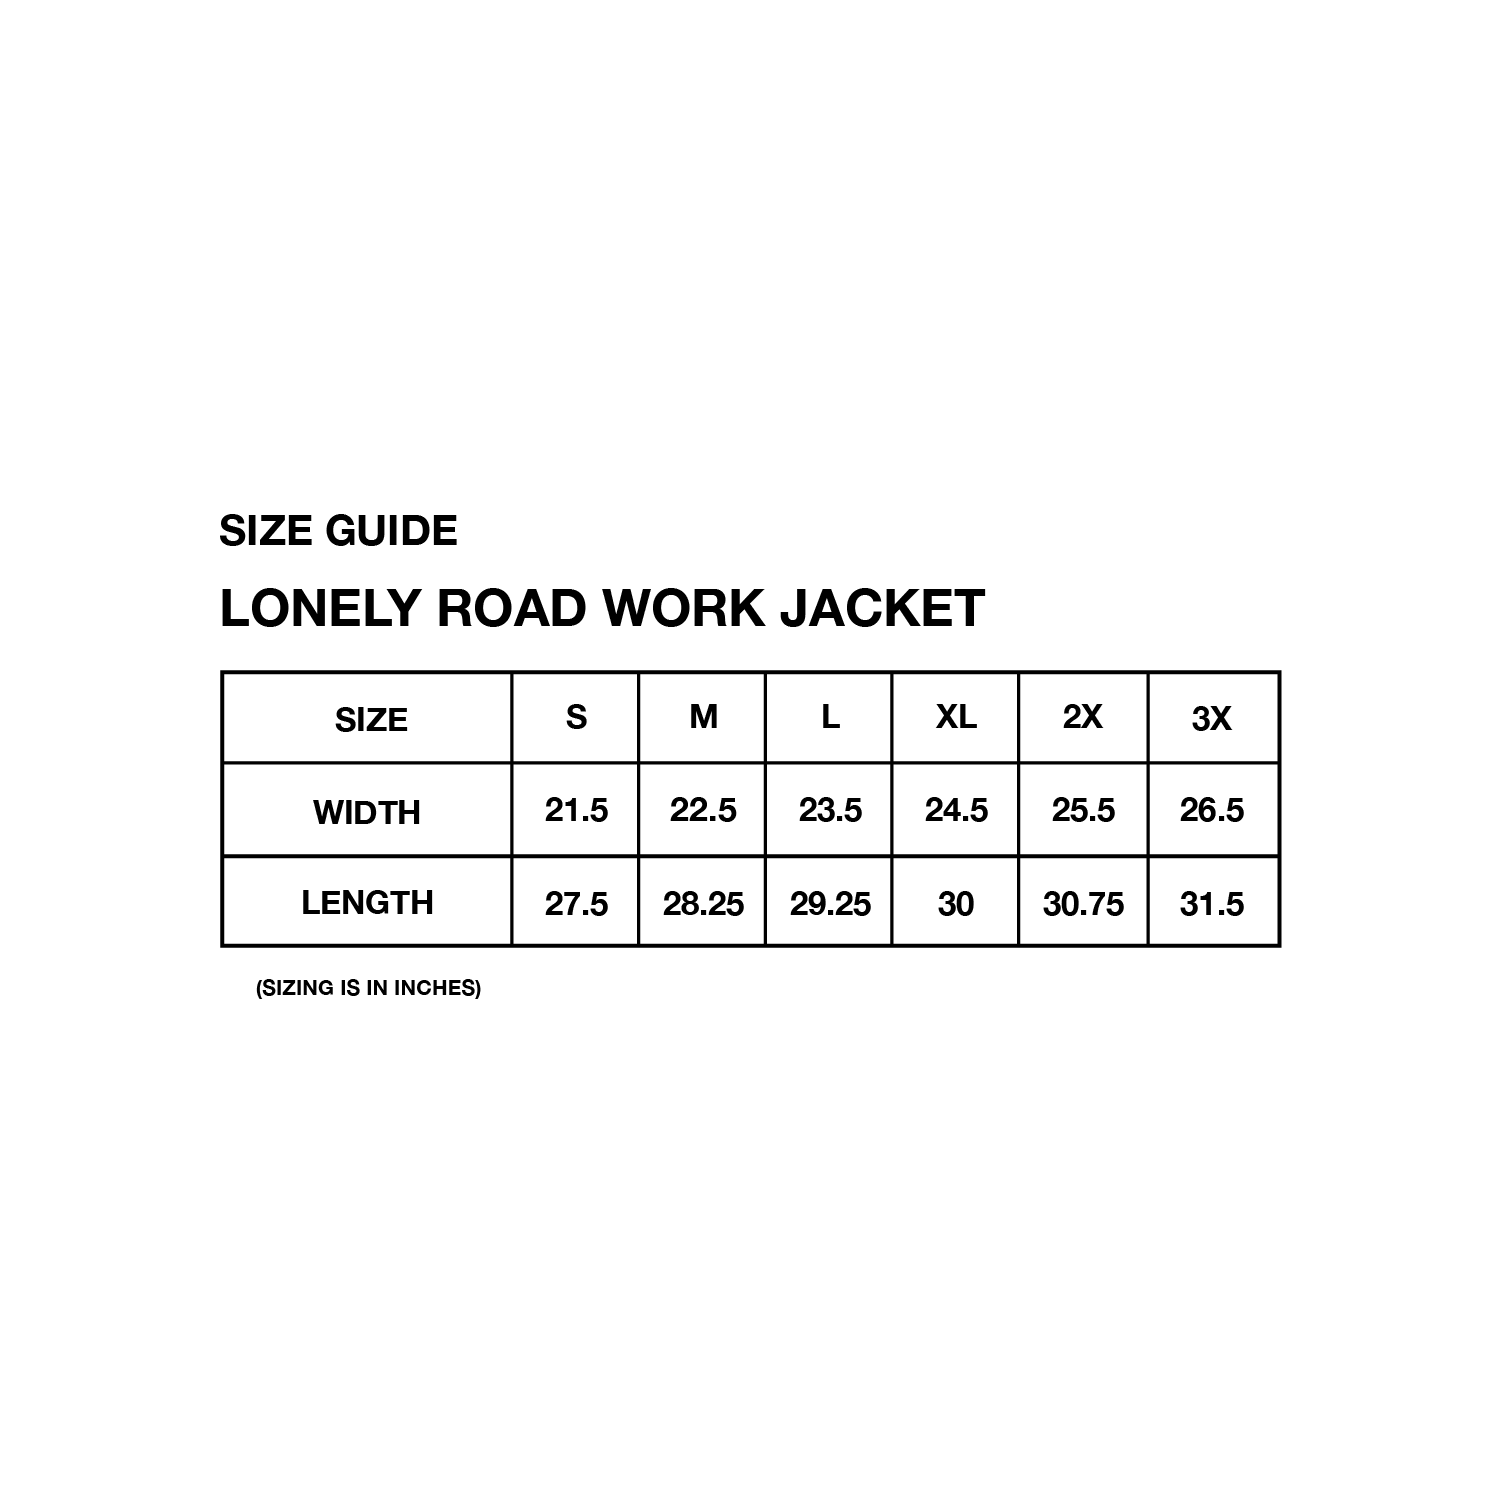 Lonely Road Work Jacket